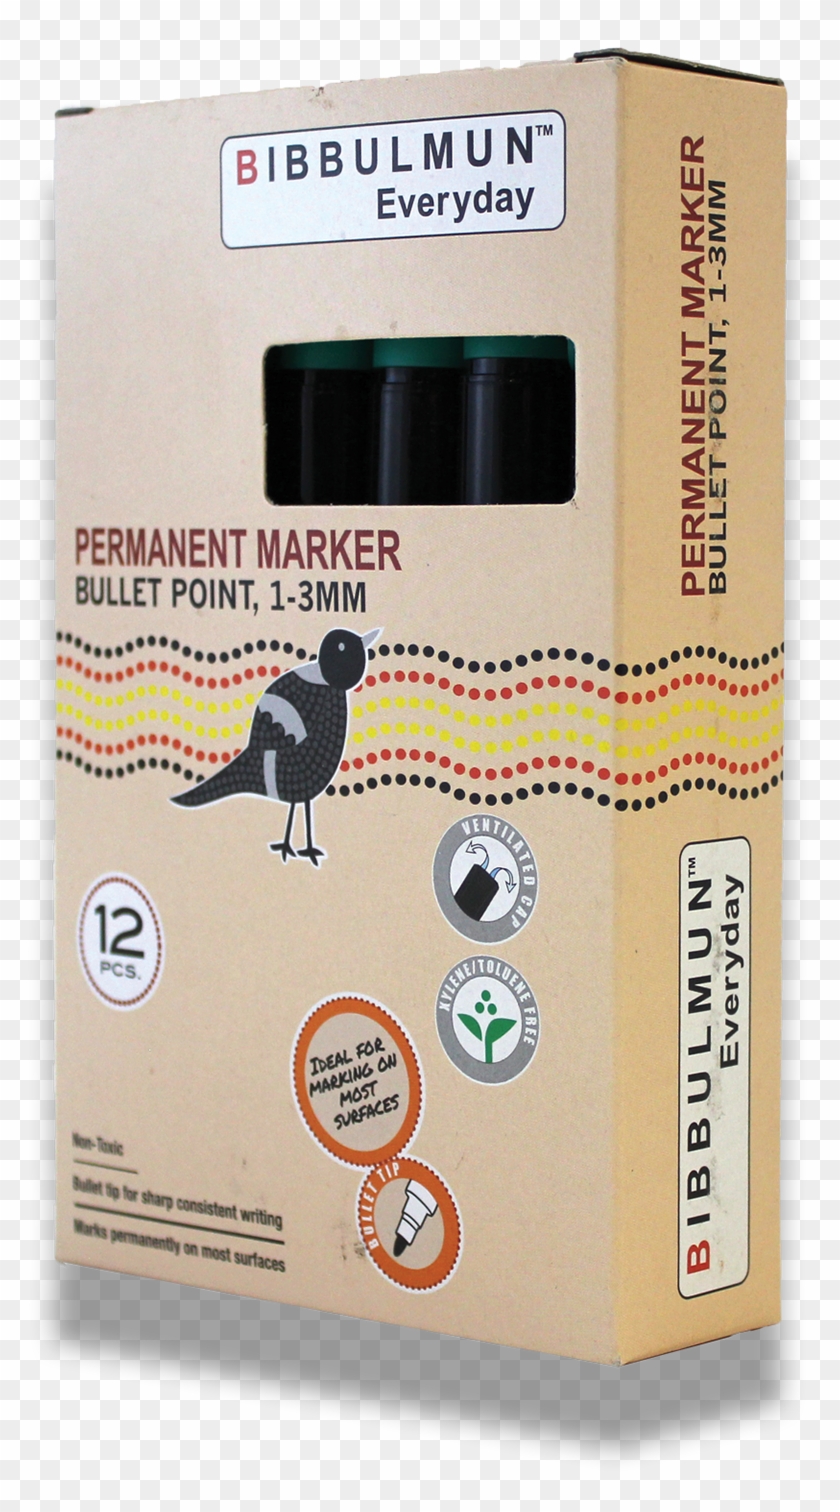 Bibbulmun Permanent Markers Have A Bullet Tip For Smooth - Carton Clipart #166620